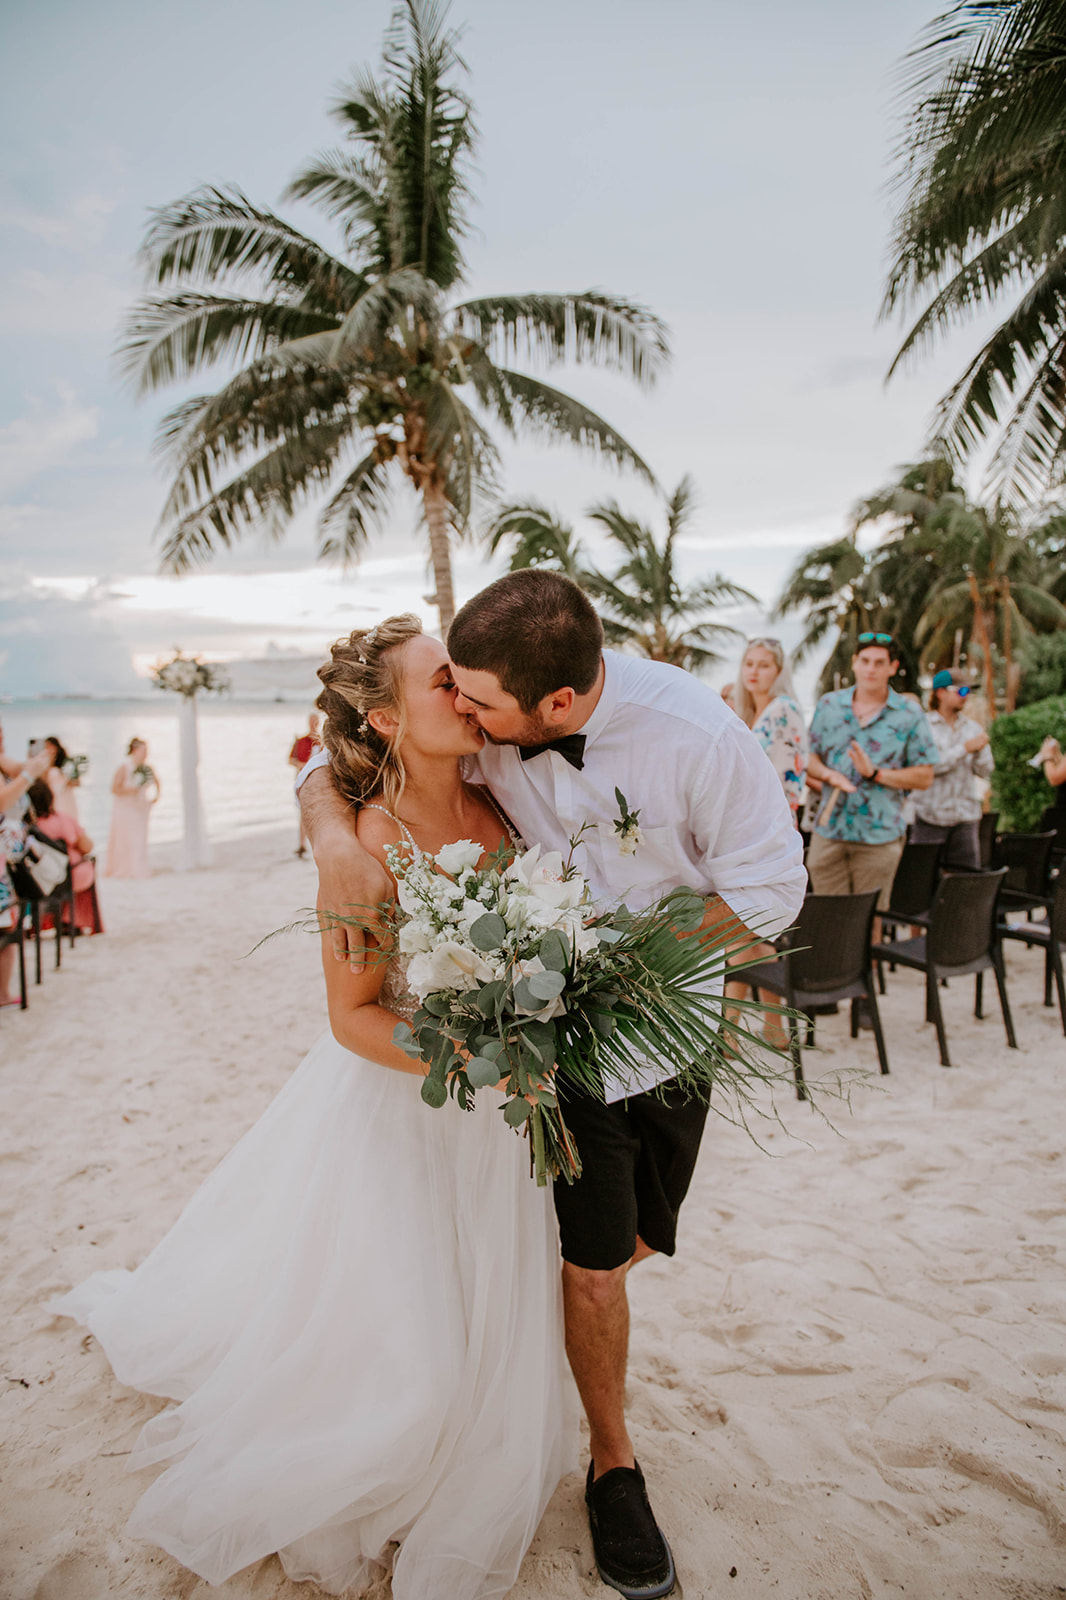 Groom kissing bride at the end of the aisle at Zama yacht and beach club